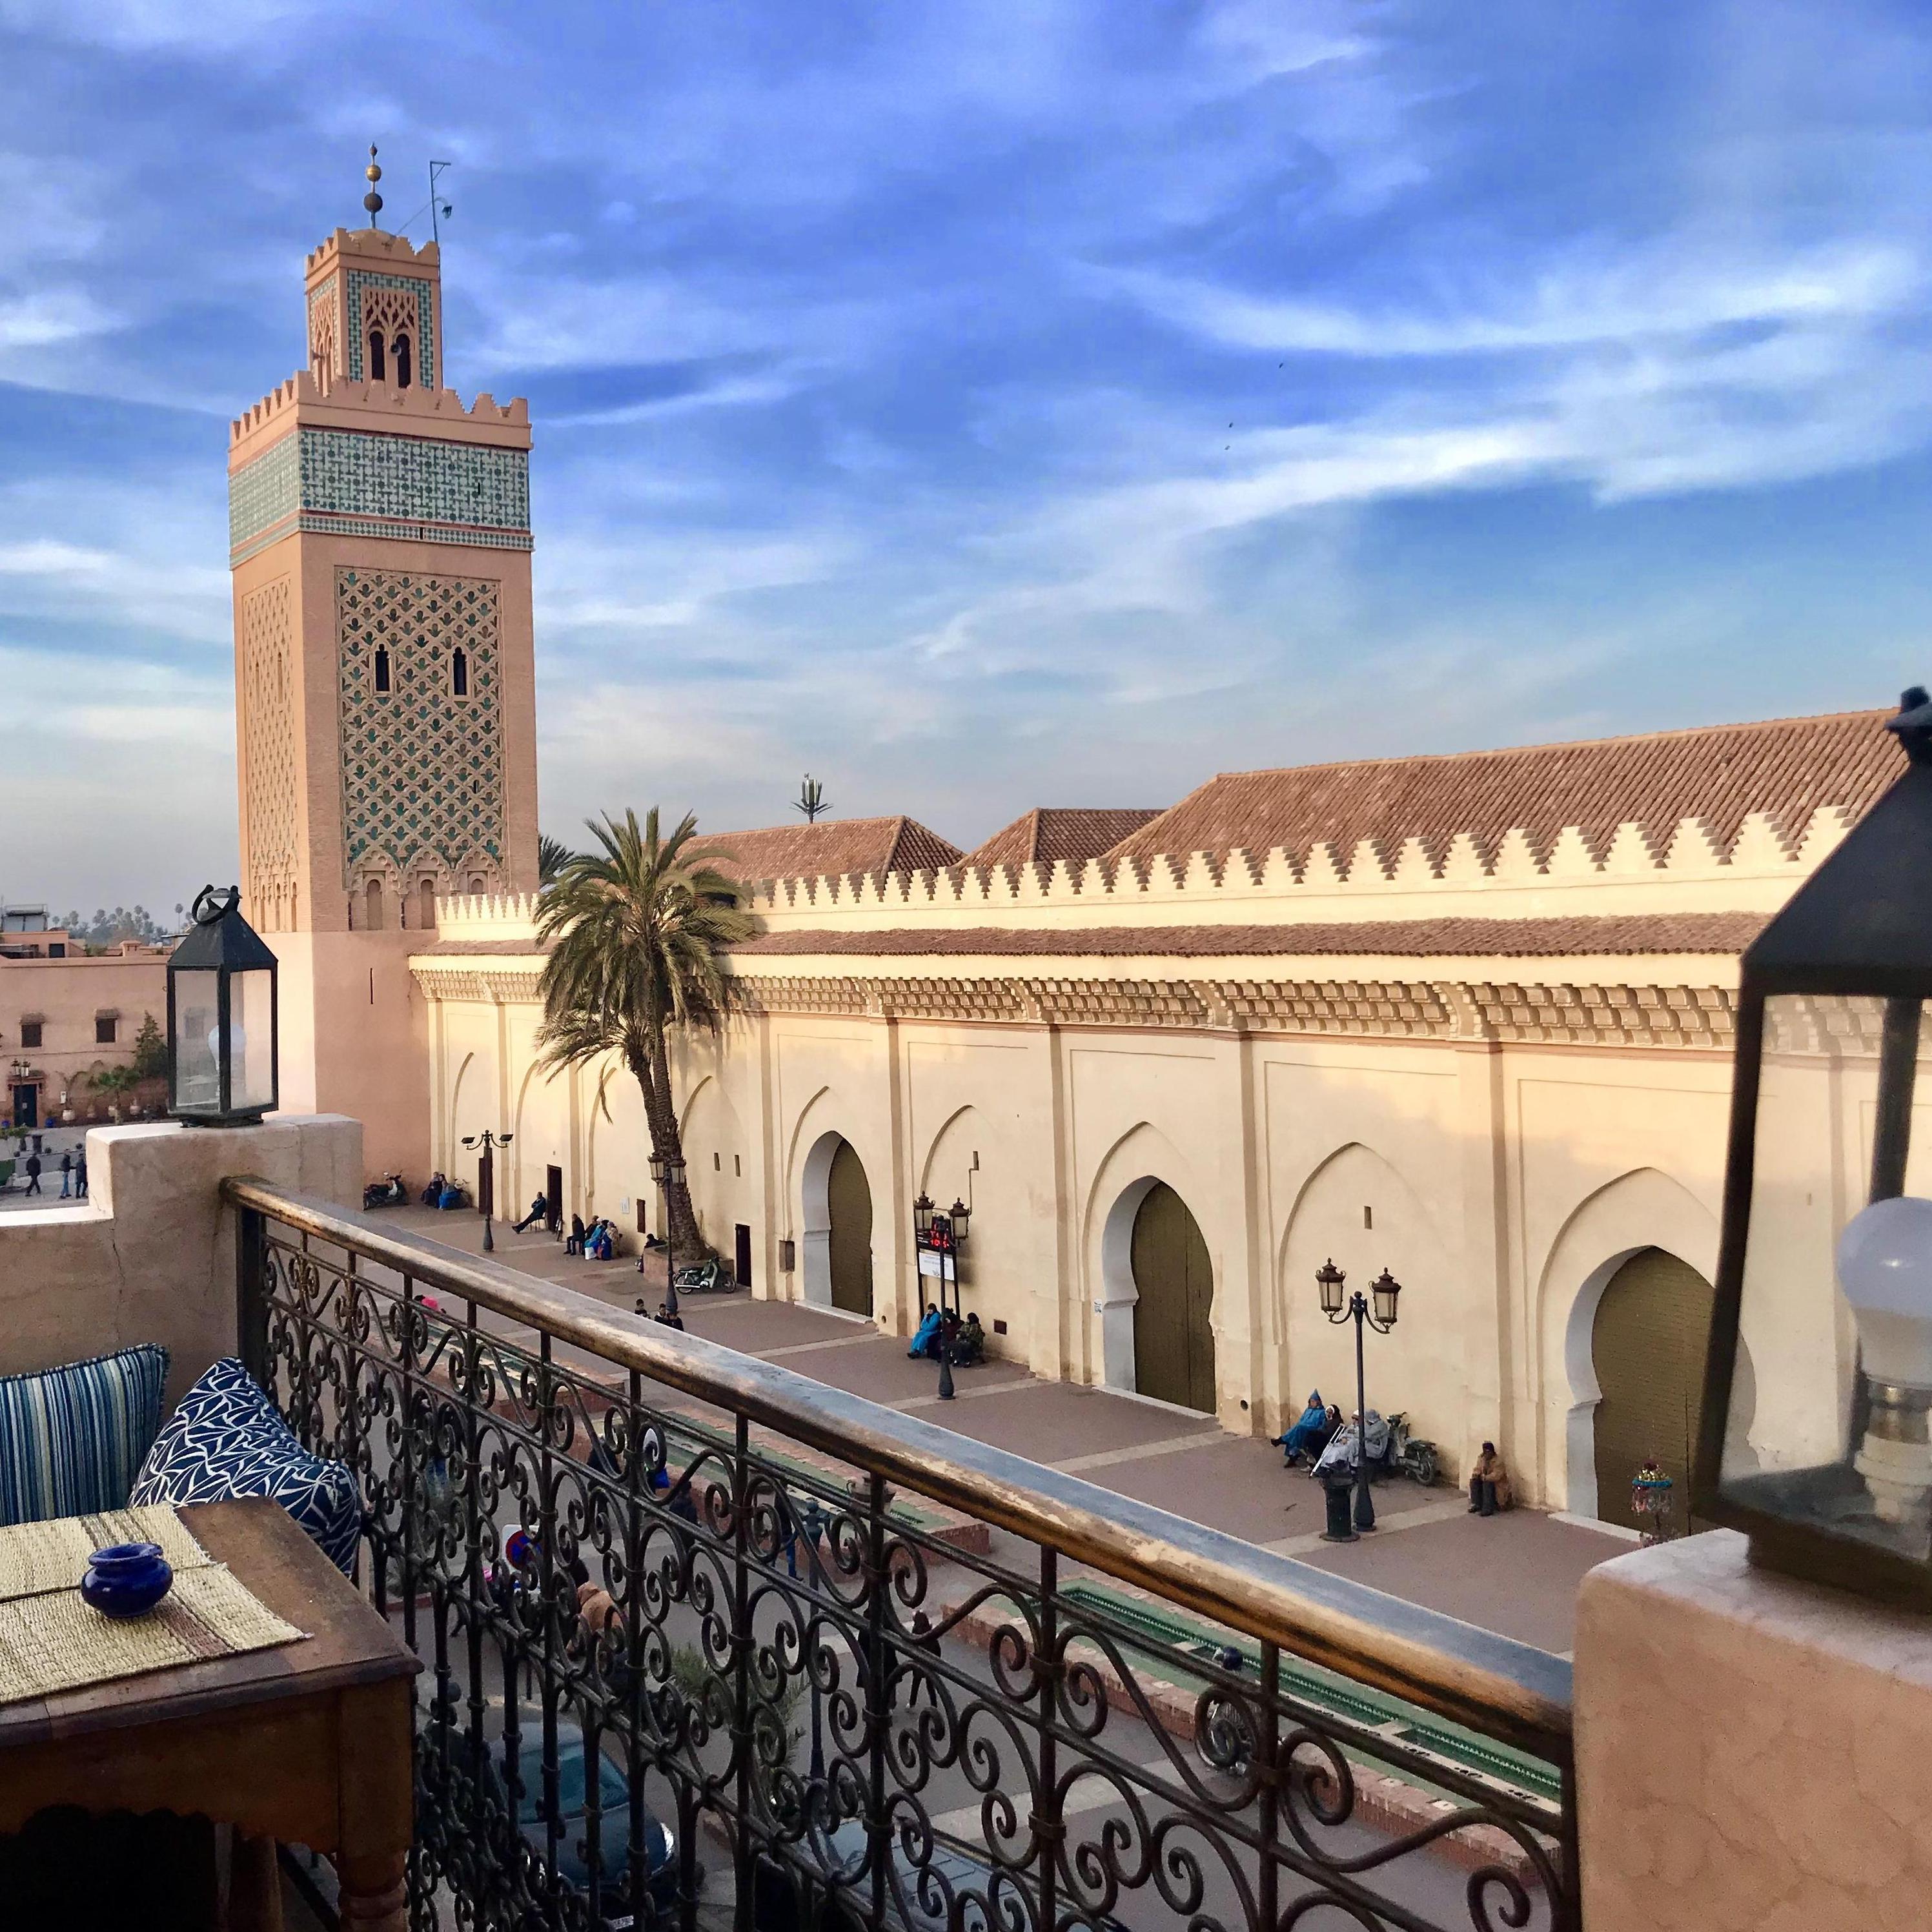 View of the Kasbah Mosque in historic Marrakech
2018